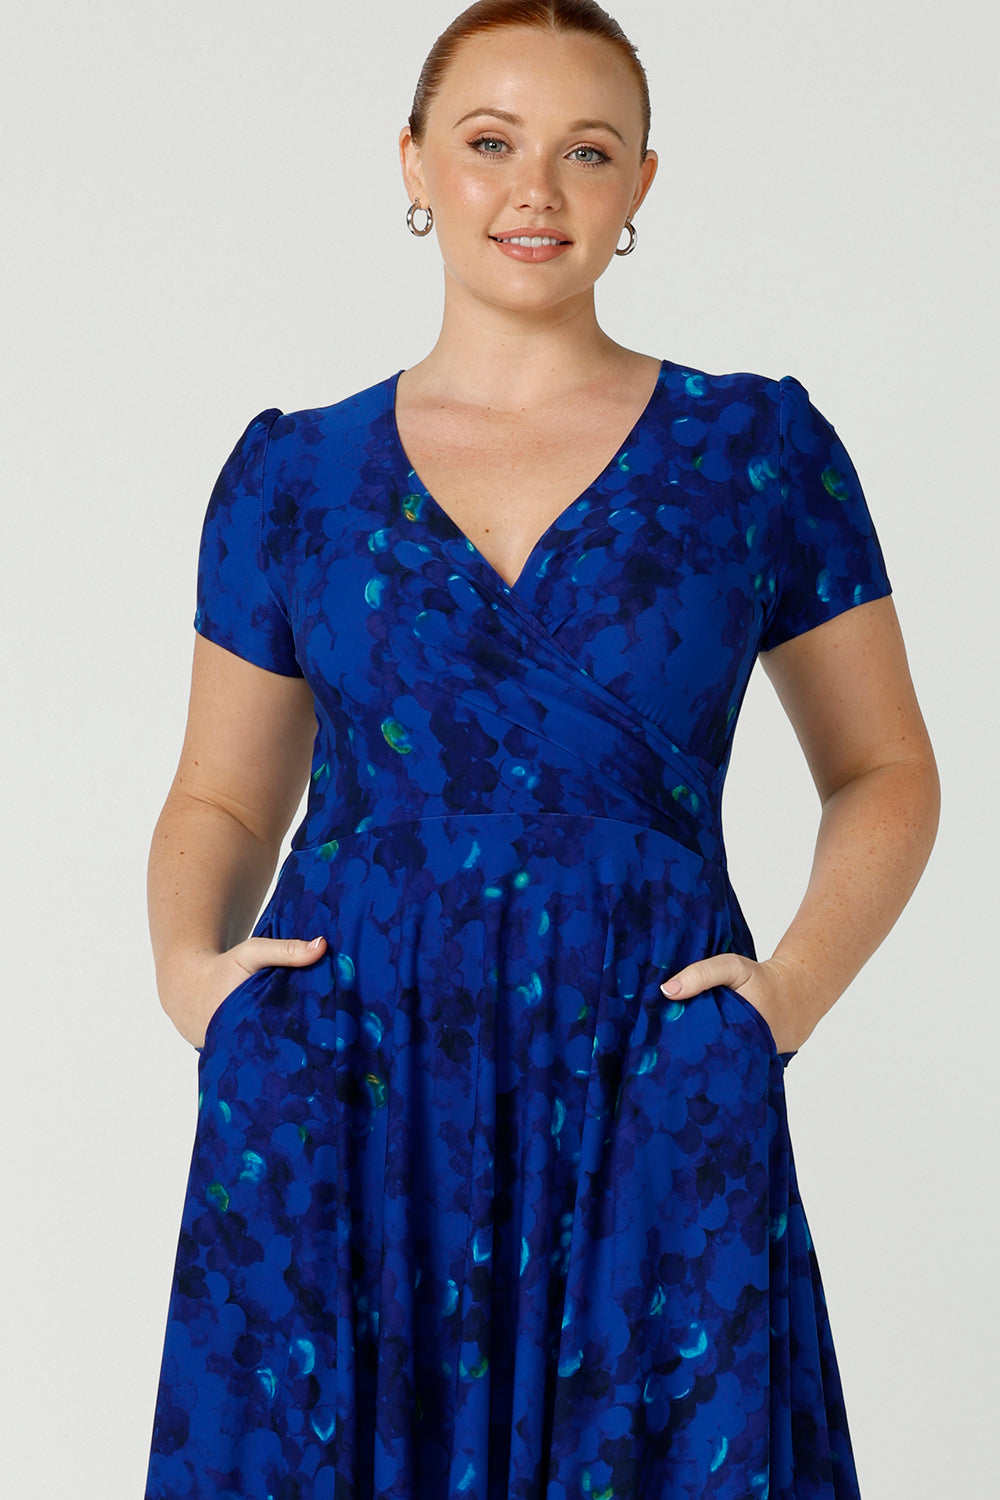 A size 12 fuller figure woman, wearing a chic dress for plus size and fuller figure women, this V-neck dress with 3/4 sleeves comes in a cobalt abstract spotted print and has a knee-length skirt, this dress is good for casual weekend wear.’